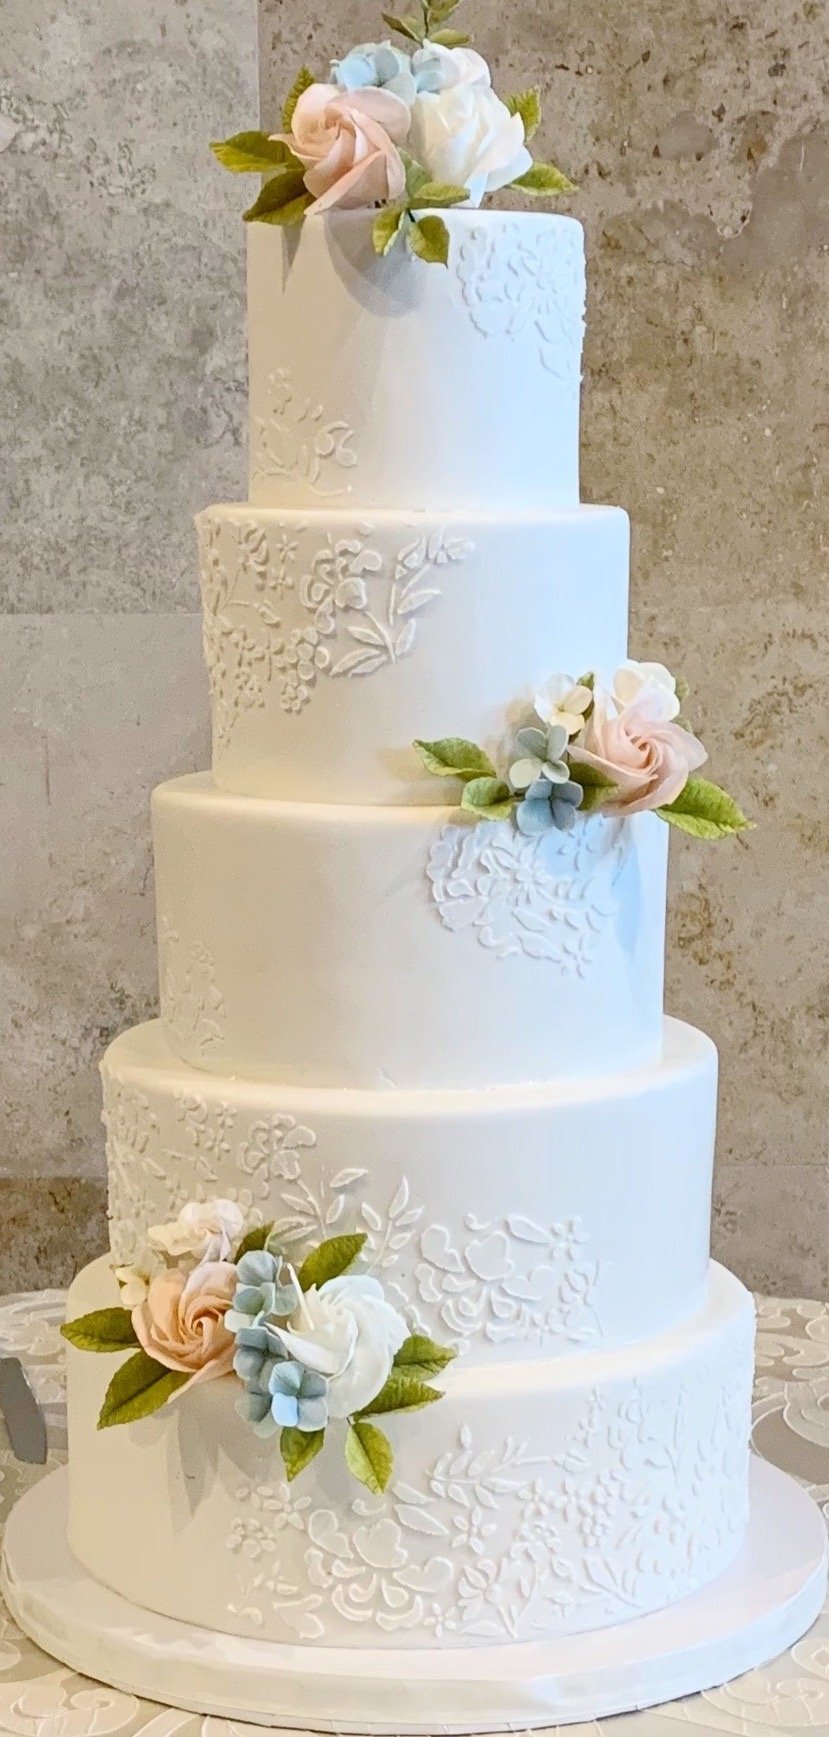 White 5 tier cake with white flower stencil design and light pink and blue 3D flowers.